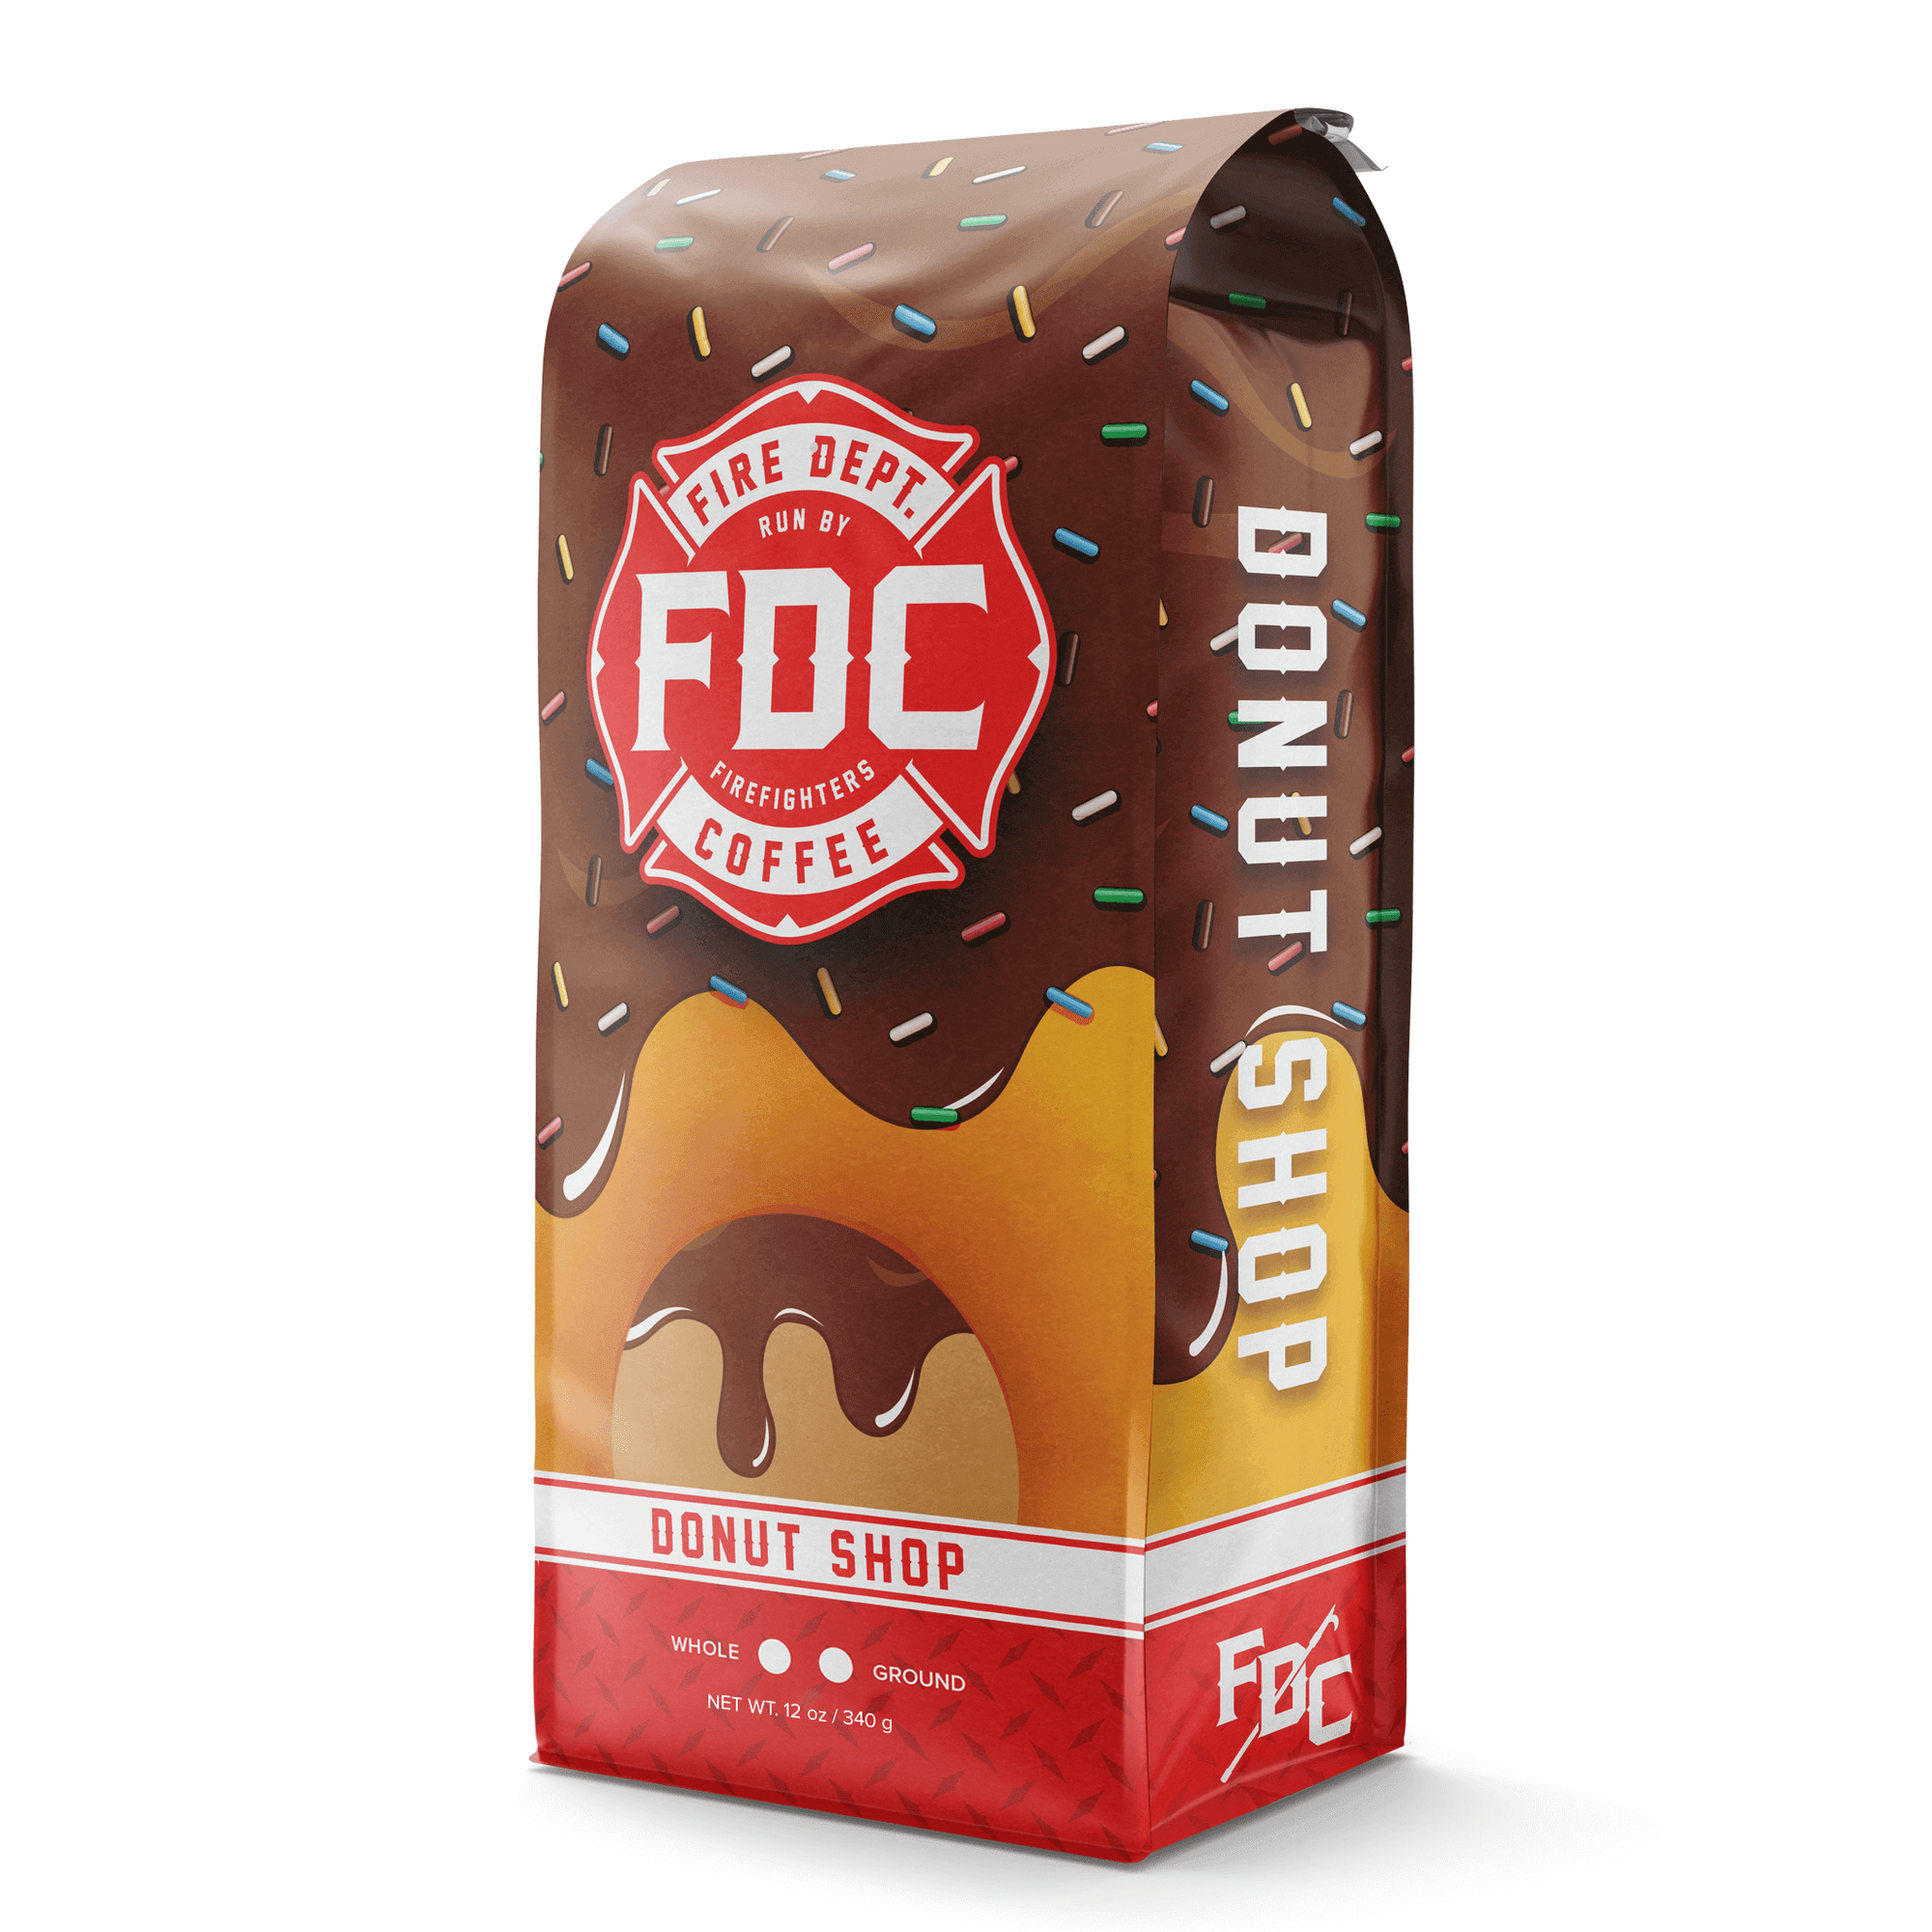 A 12 ounce package of Fire Department Coffee's Donut Shop Coffee.